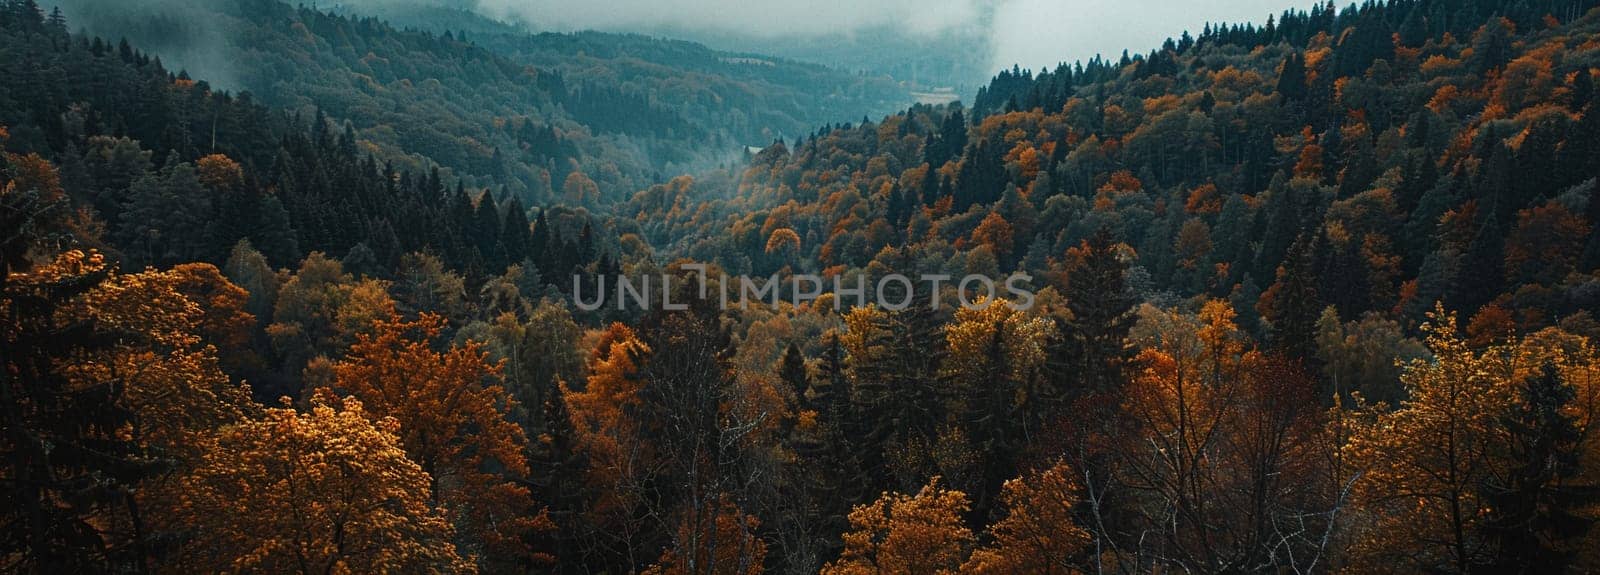 Scenic autumn forest landscape with rich oranges and yellows. Ideal background for graphic design and seasonal themes.